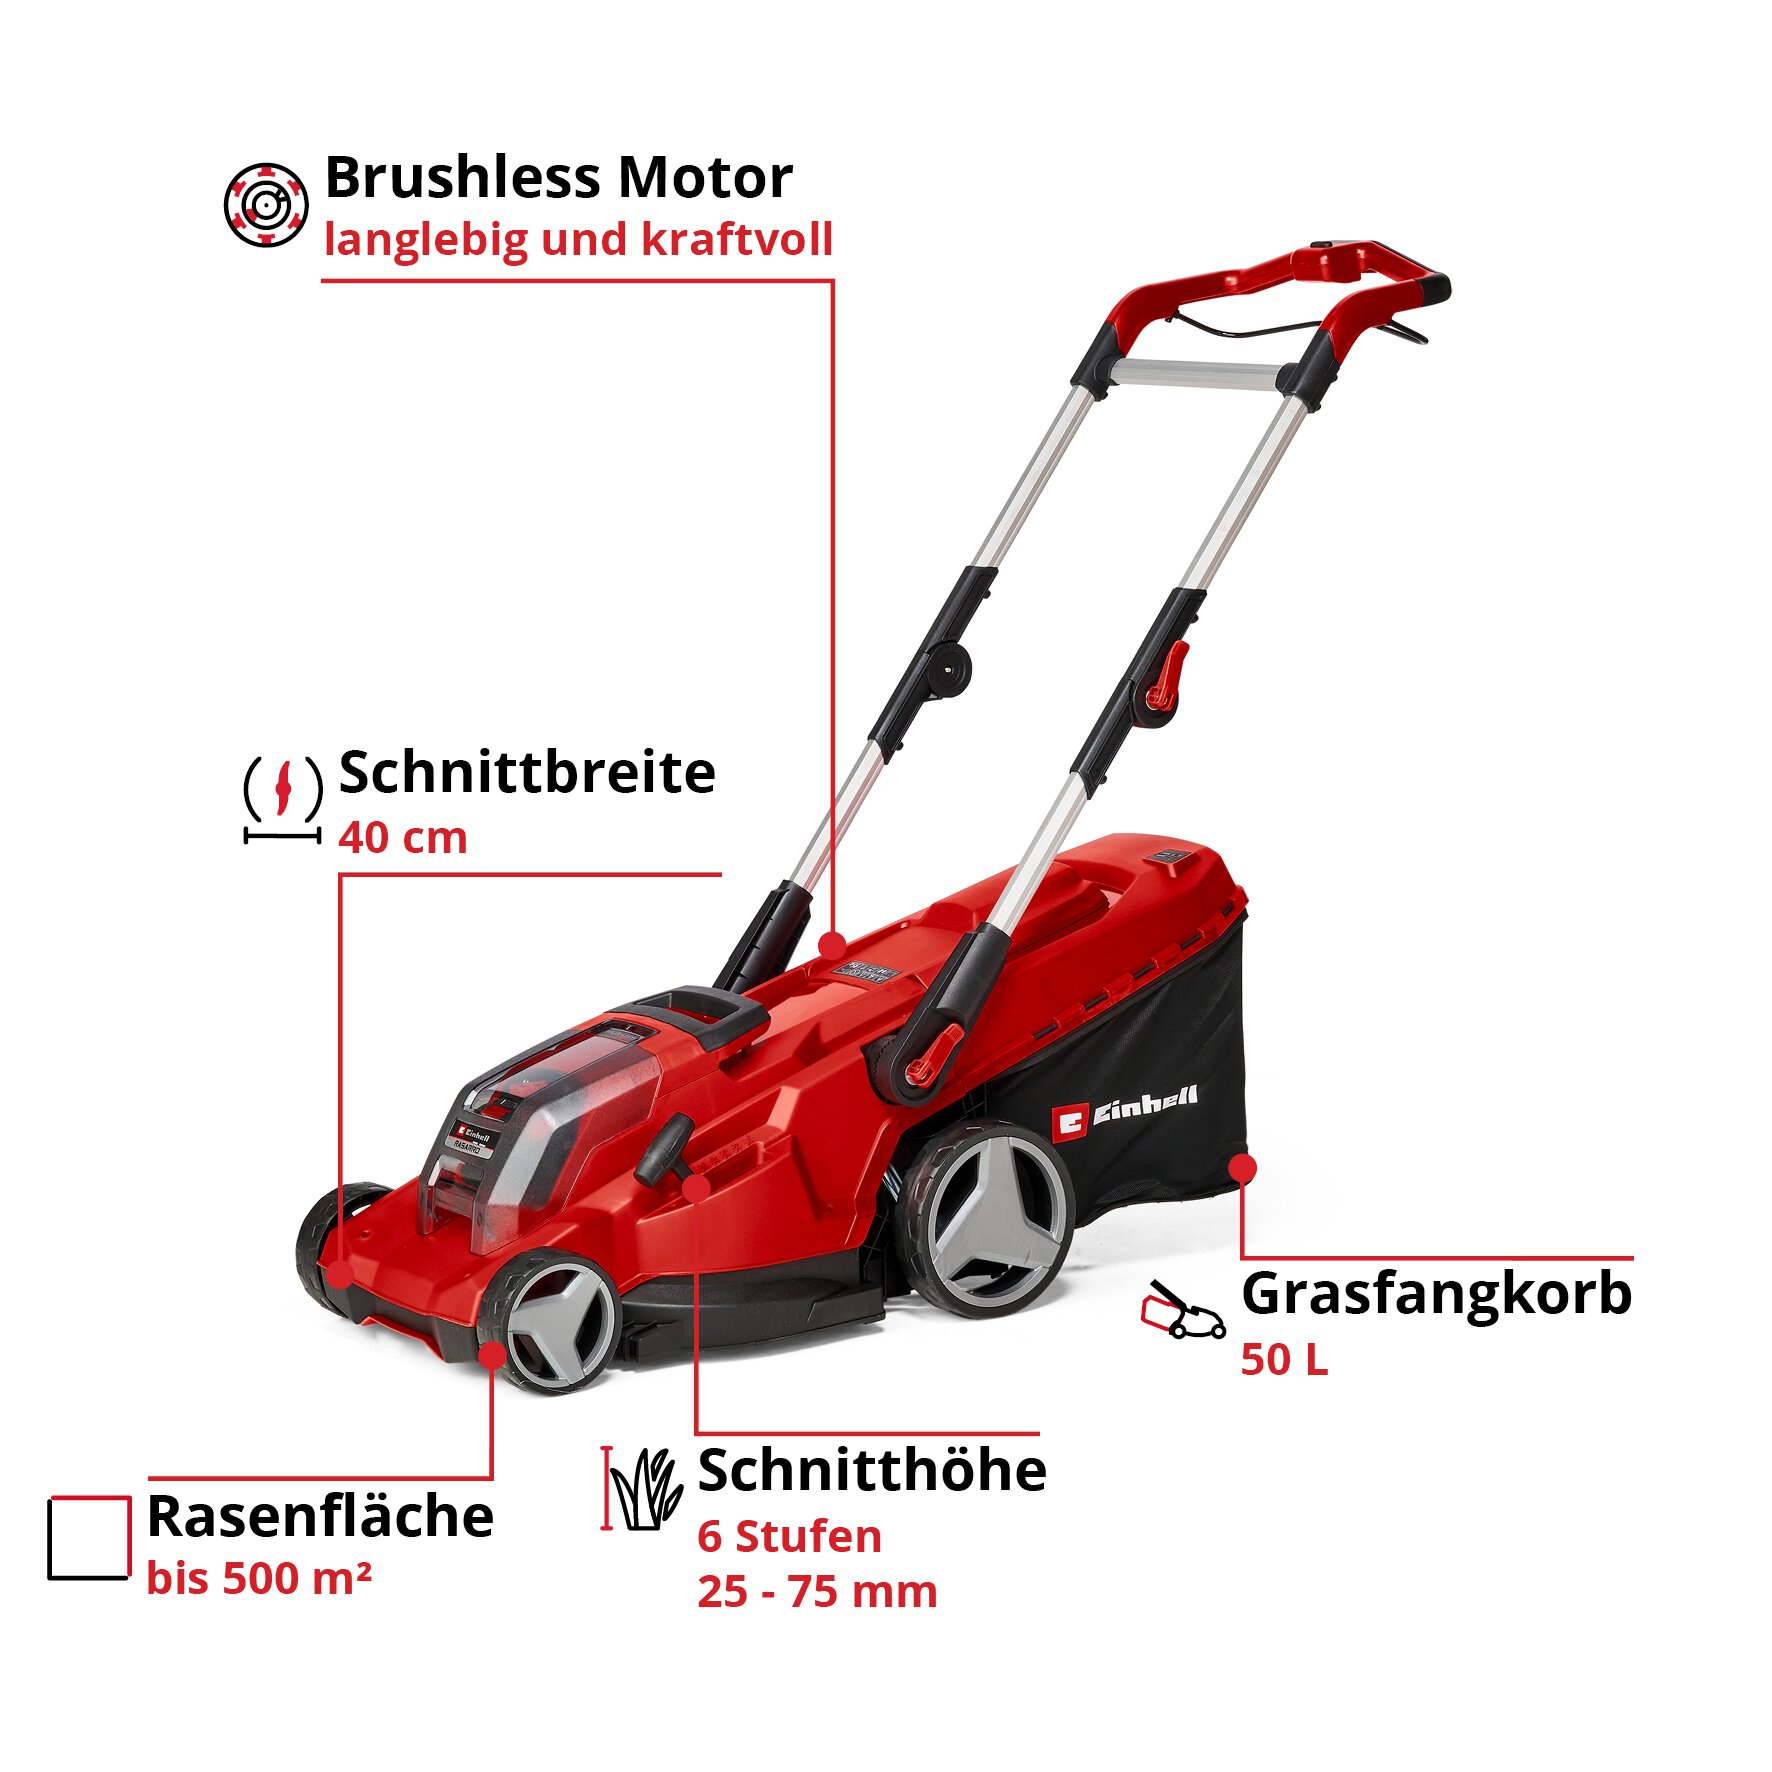 einhell-professional-cordless-lawn-mower-3413278-key_feature_image-001